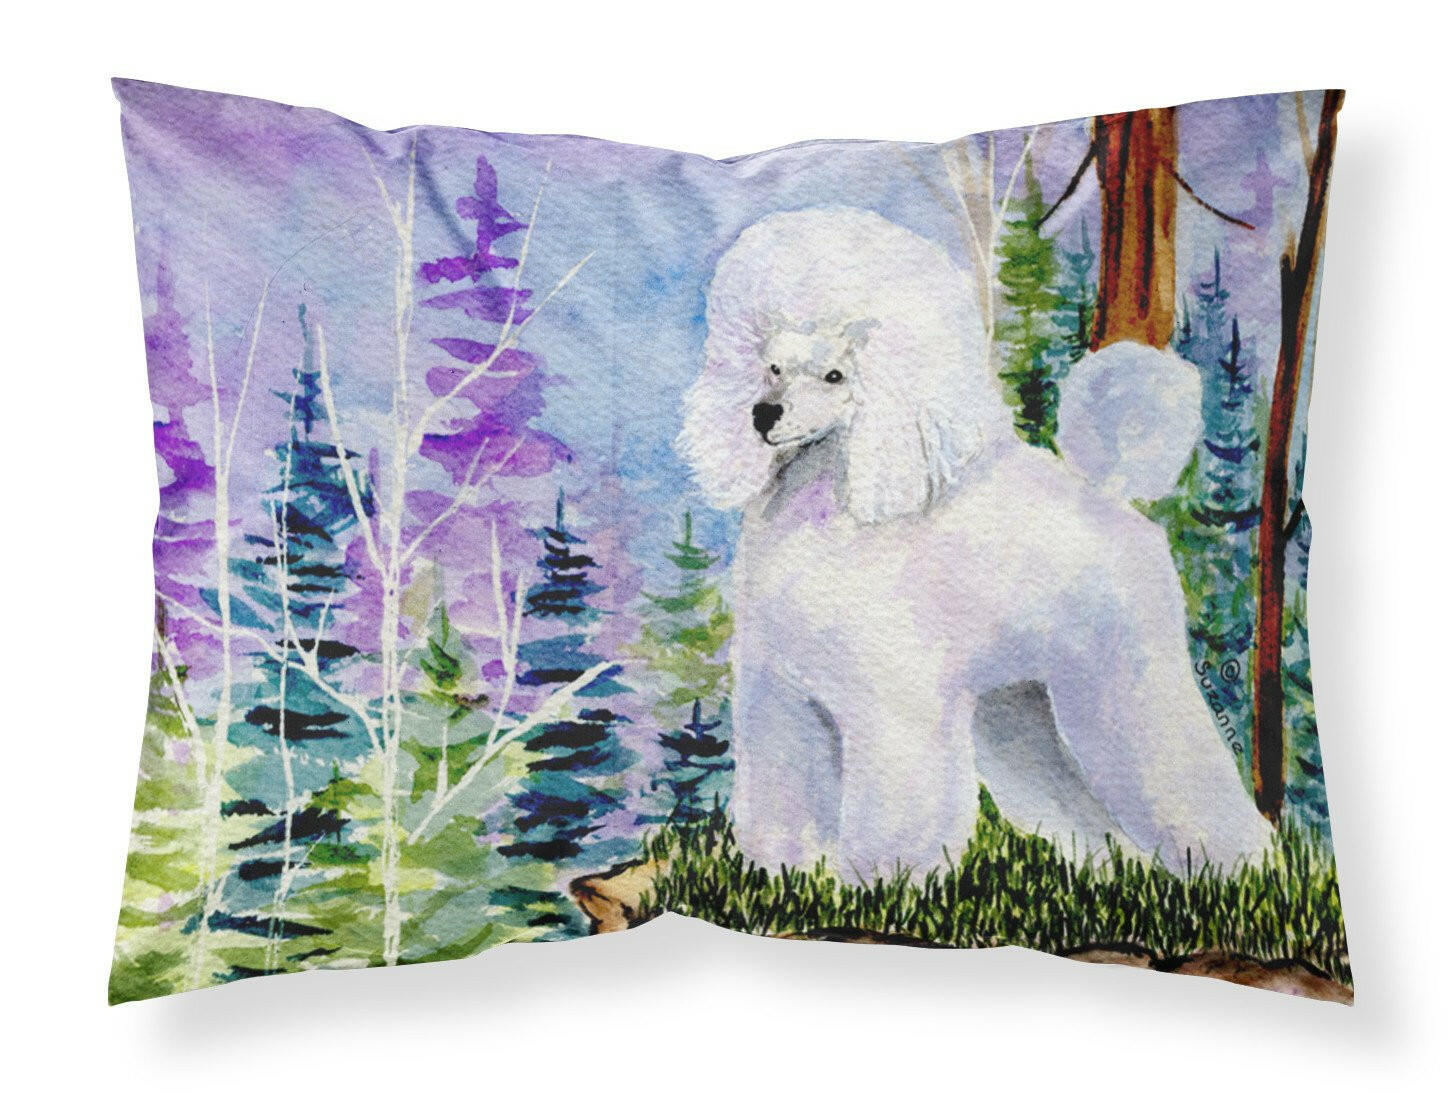 Poodle Moisture wicking Fabric standard pillowcase by Caroline's Treasures